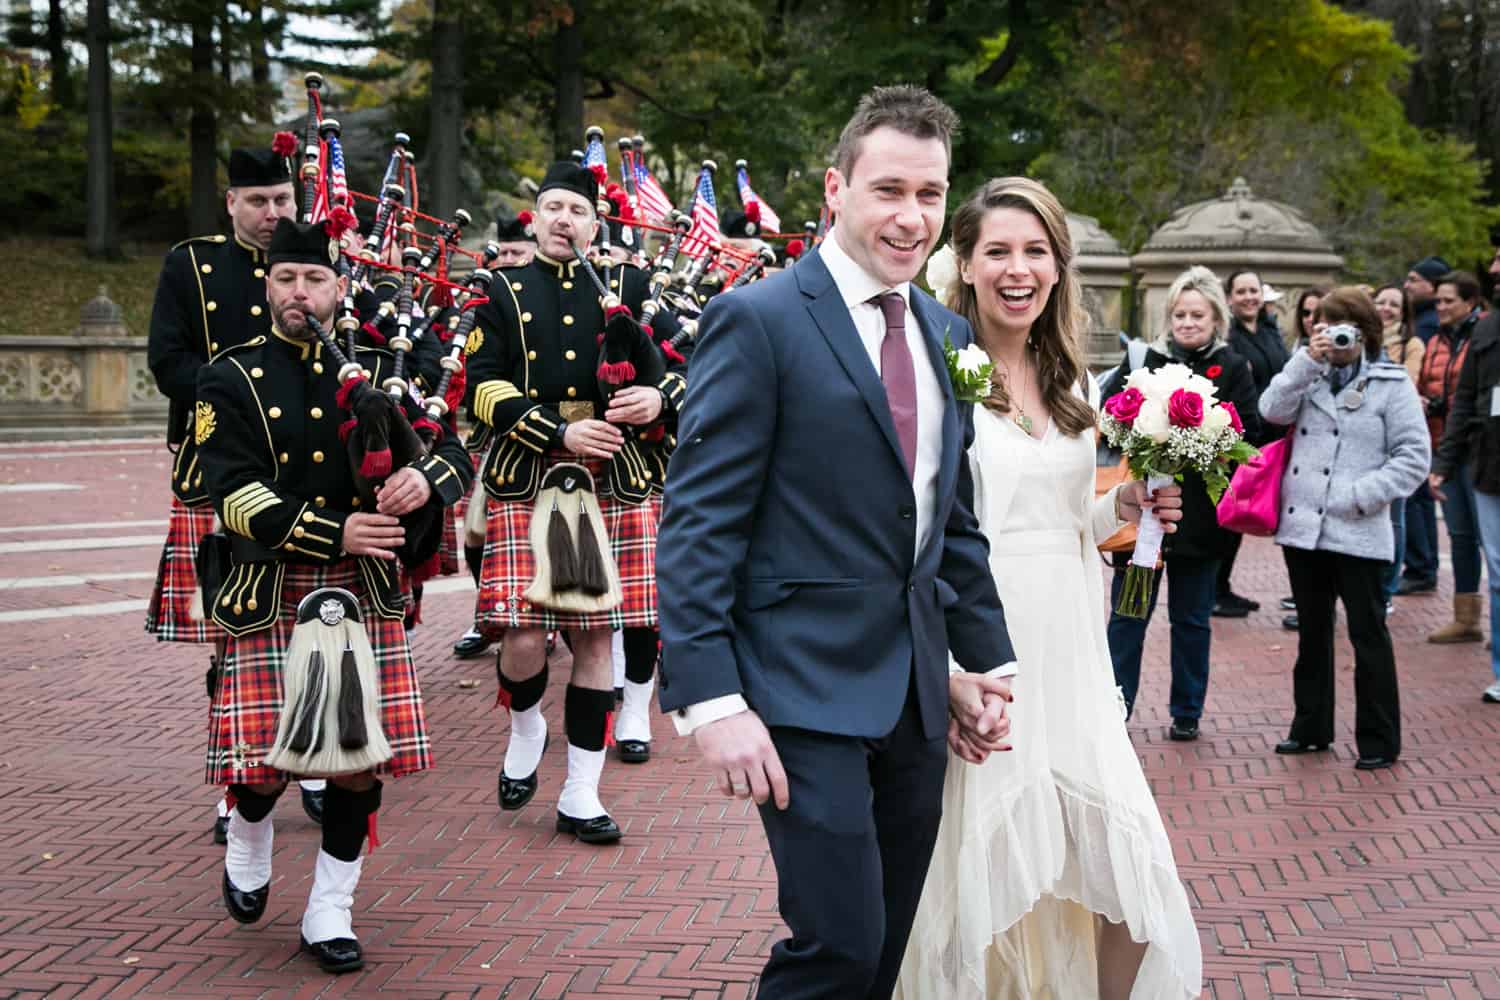 Bride and groom in front of Scottish marching band at a Bethesda Fountain wedding in Central Park